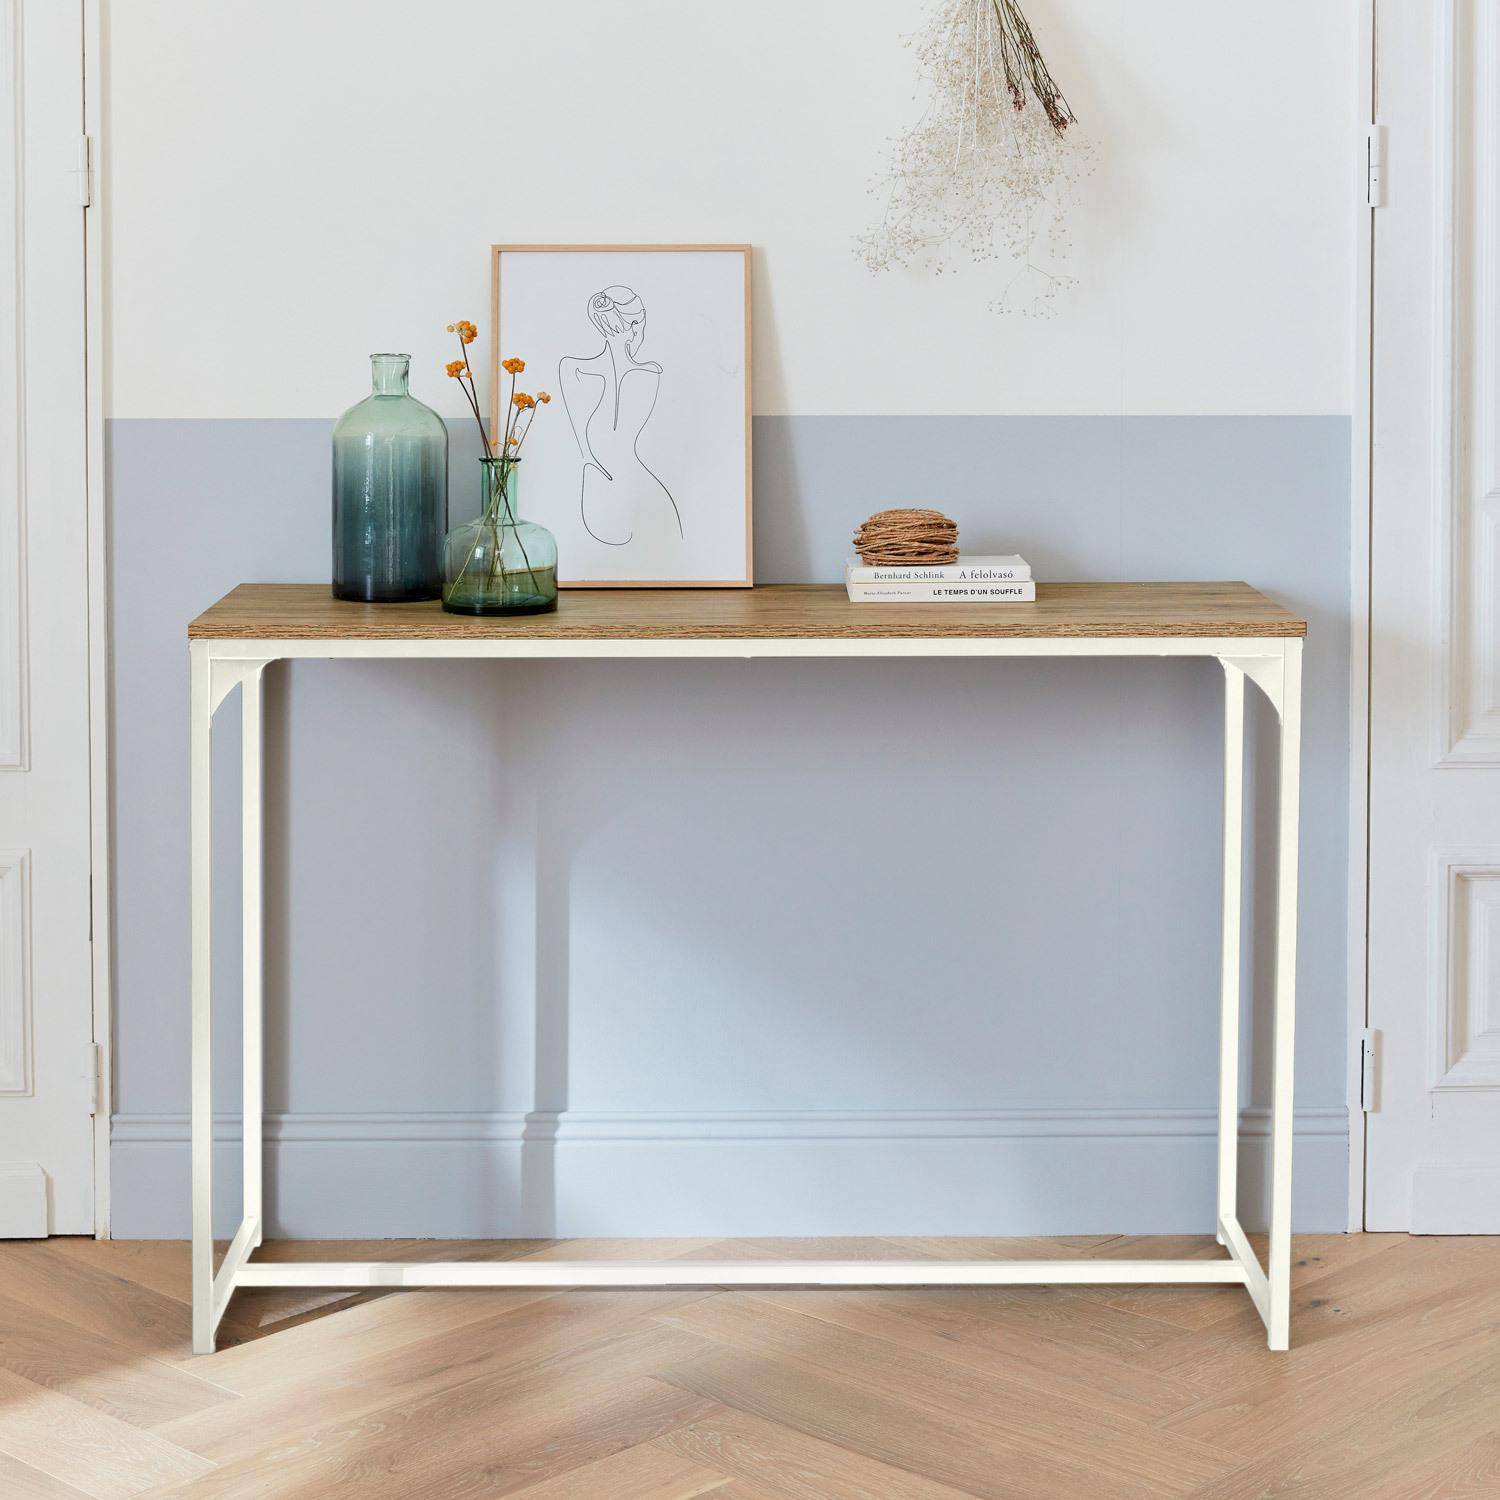 Metal and wood-style hallway console table with industrial metal legs 120cm - Loft - White Photo1